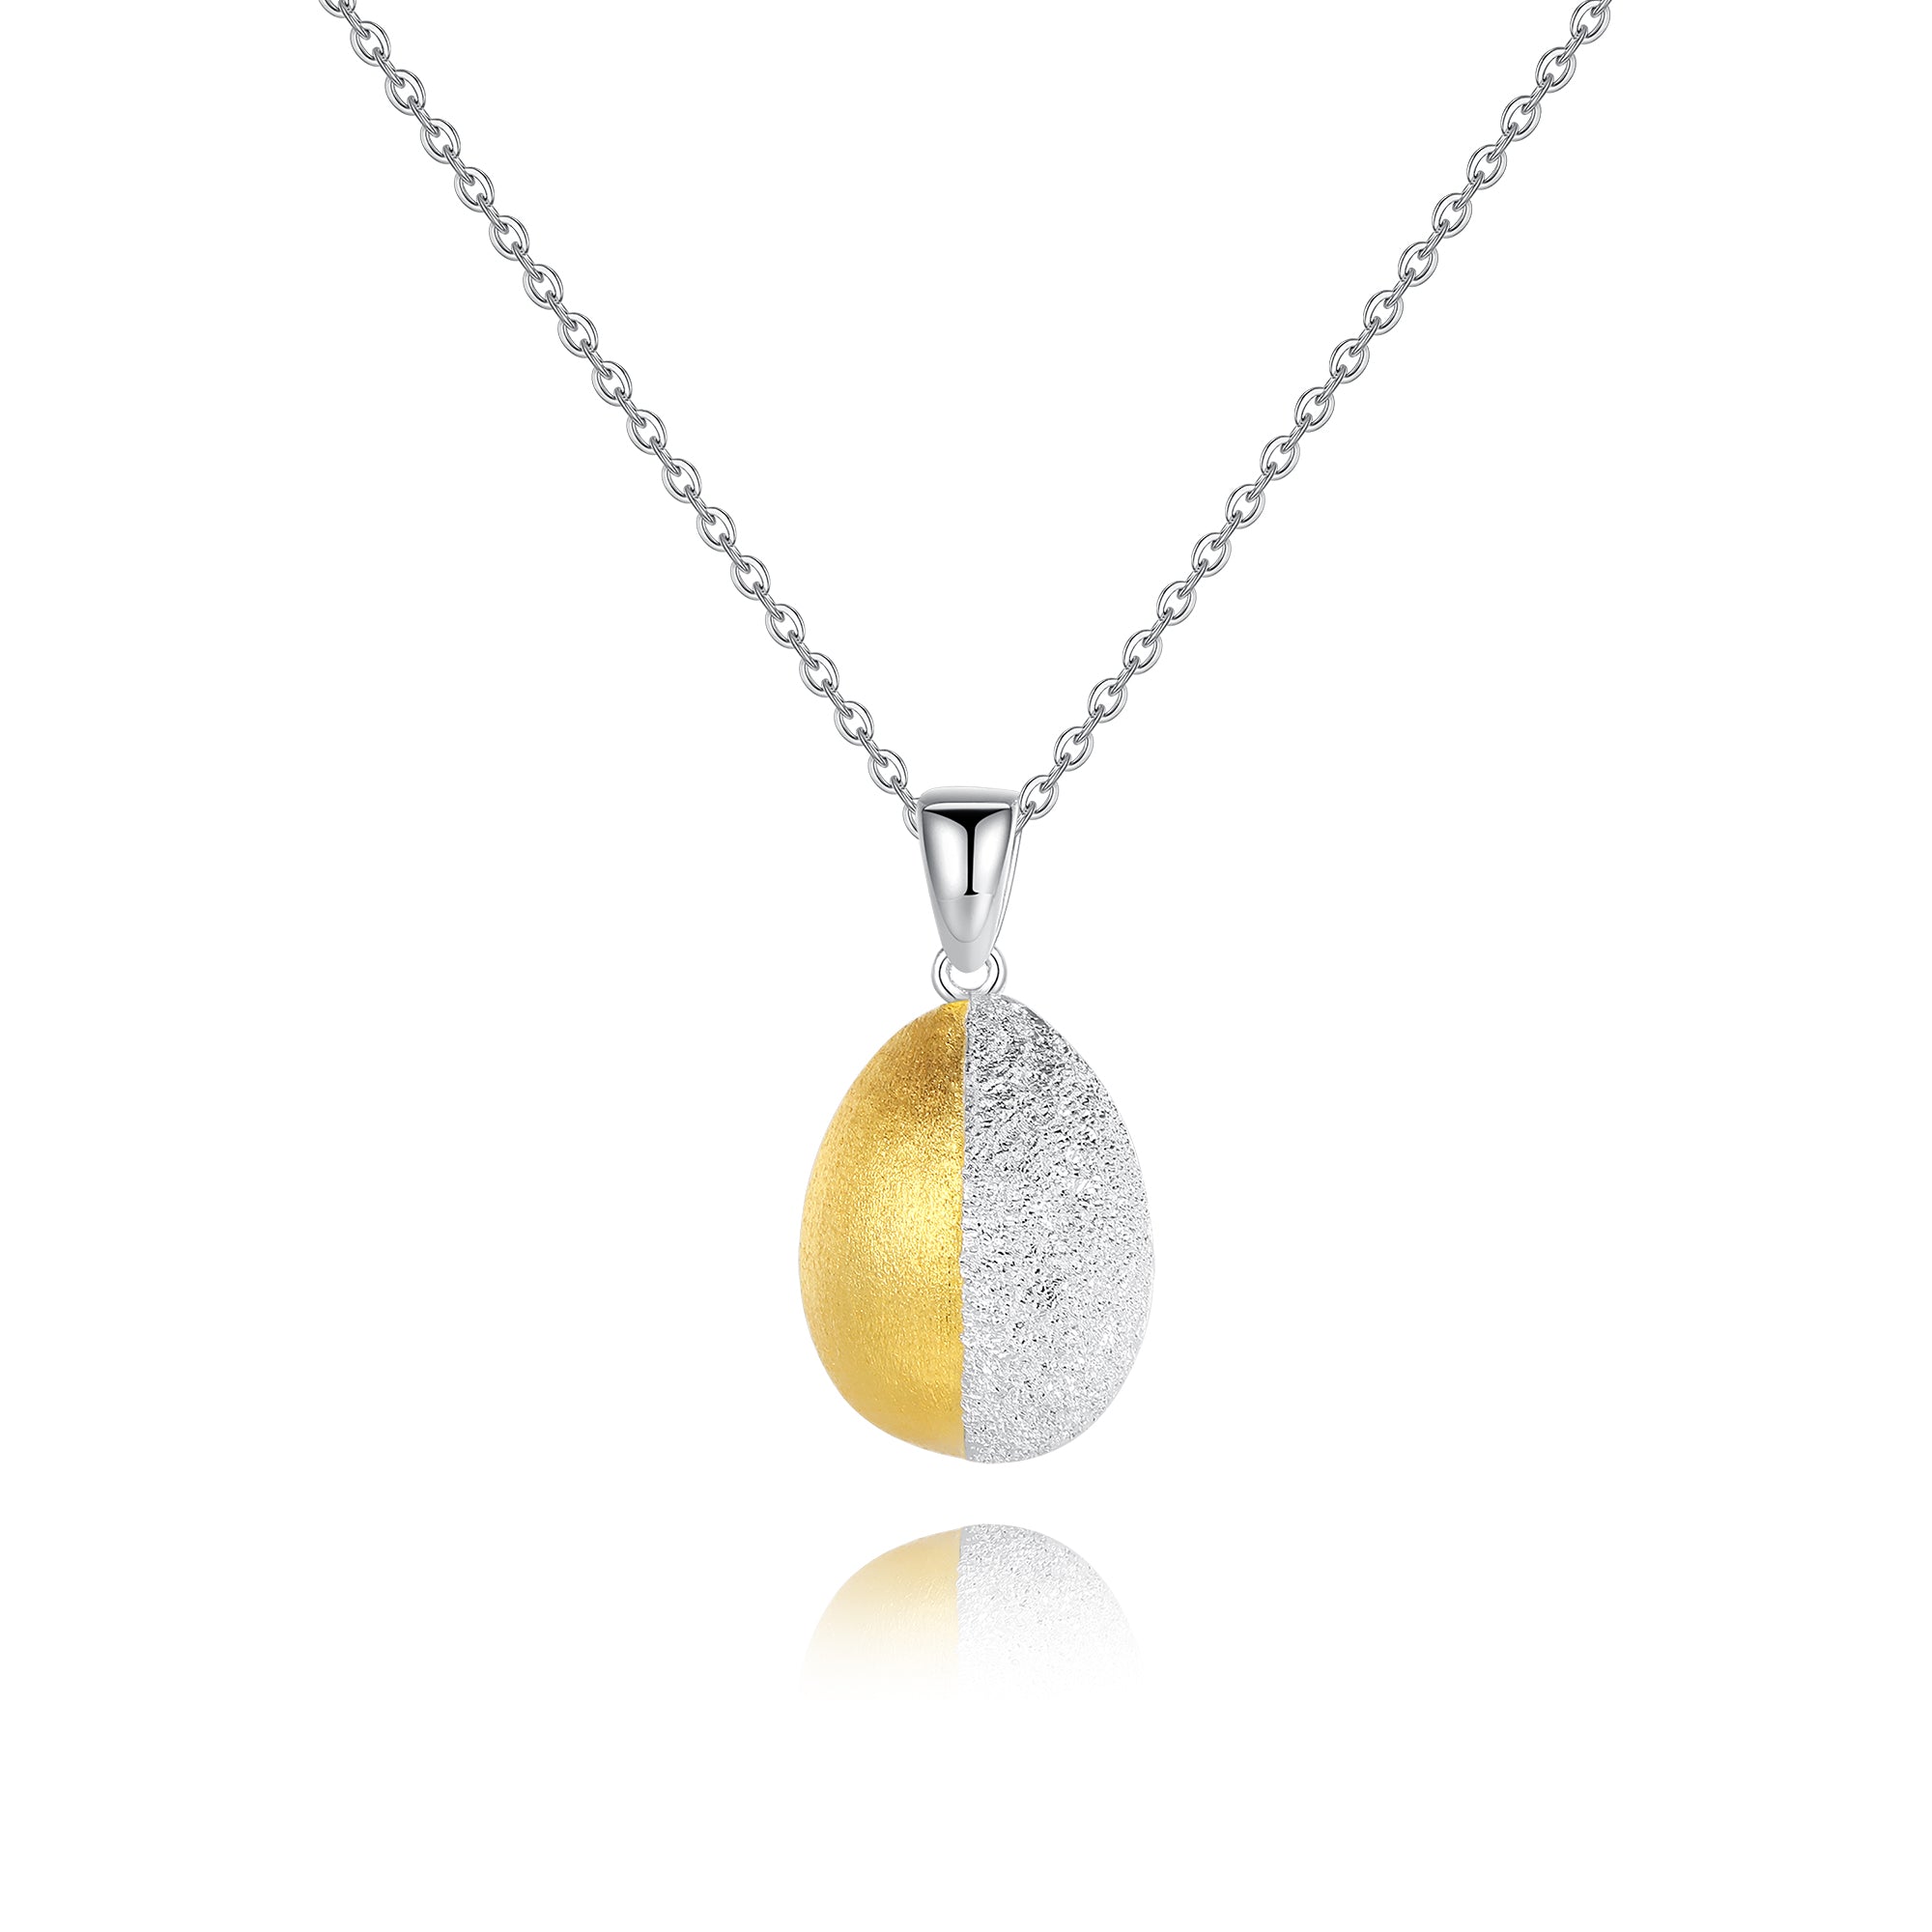 Frosted and Matted Texture Two Tone Pendant Necklace